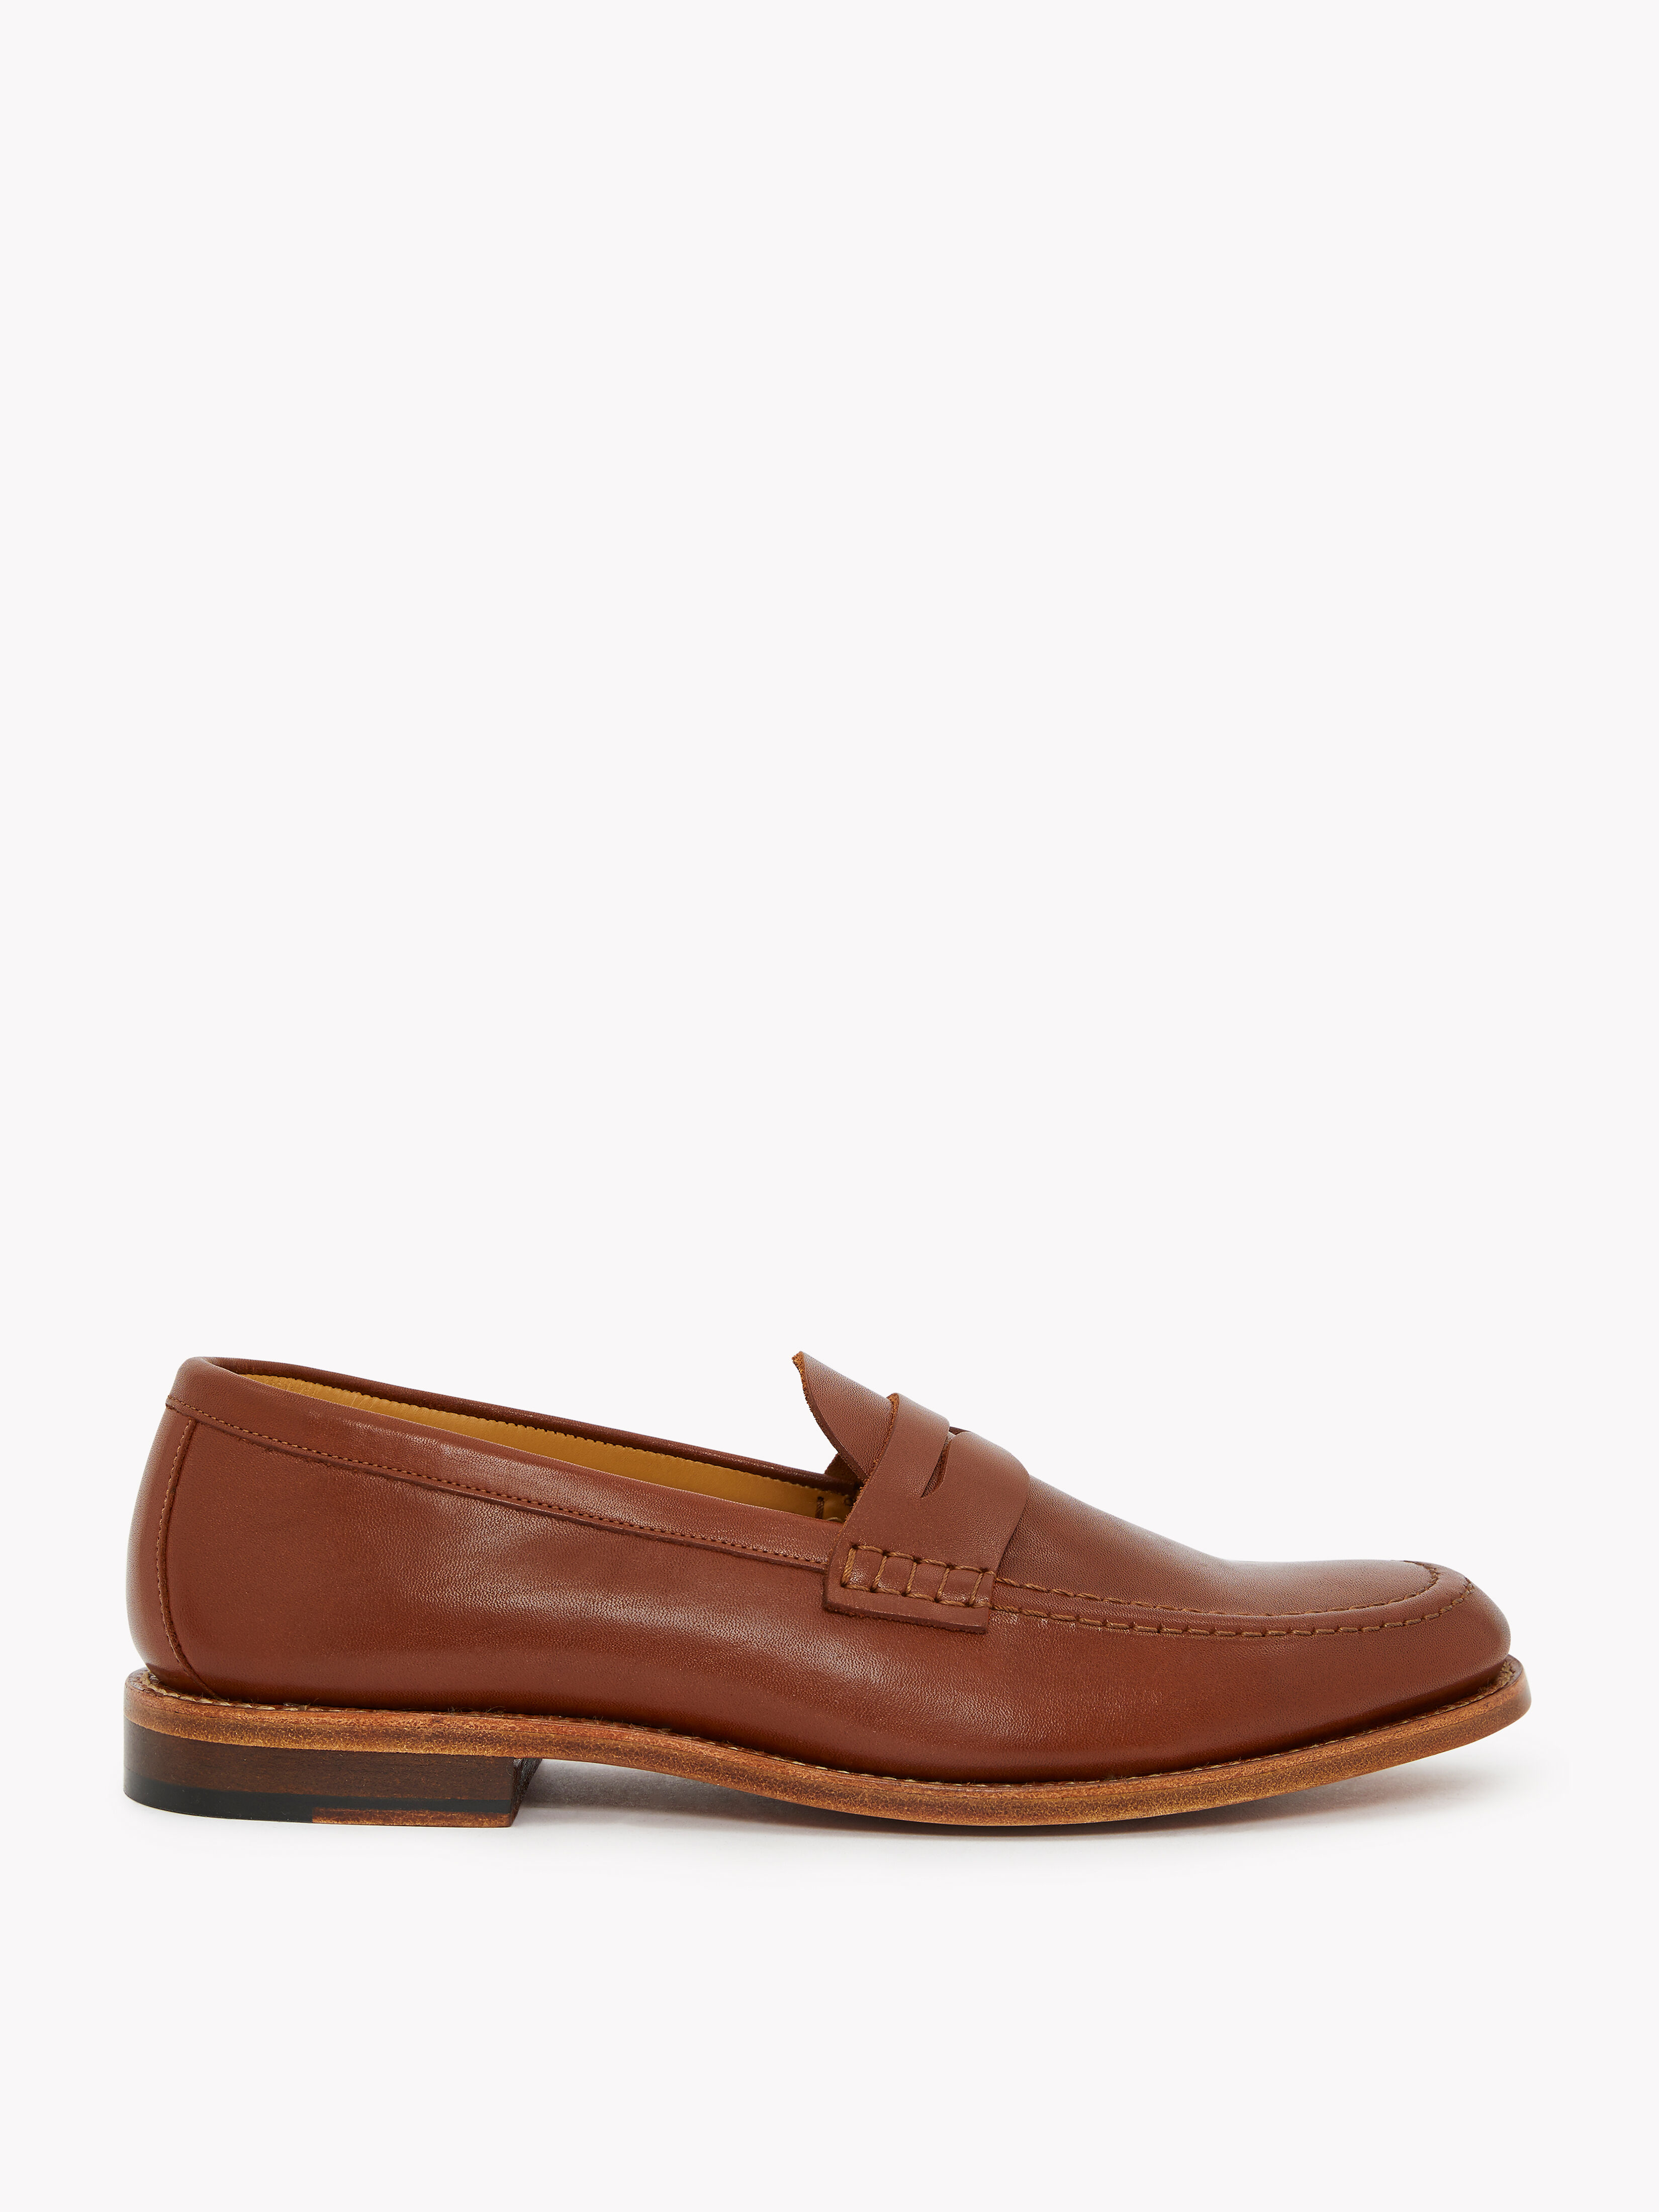 rm williams loafers